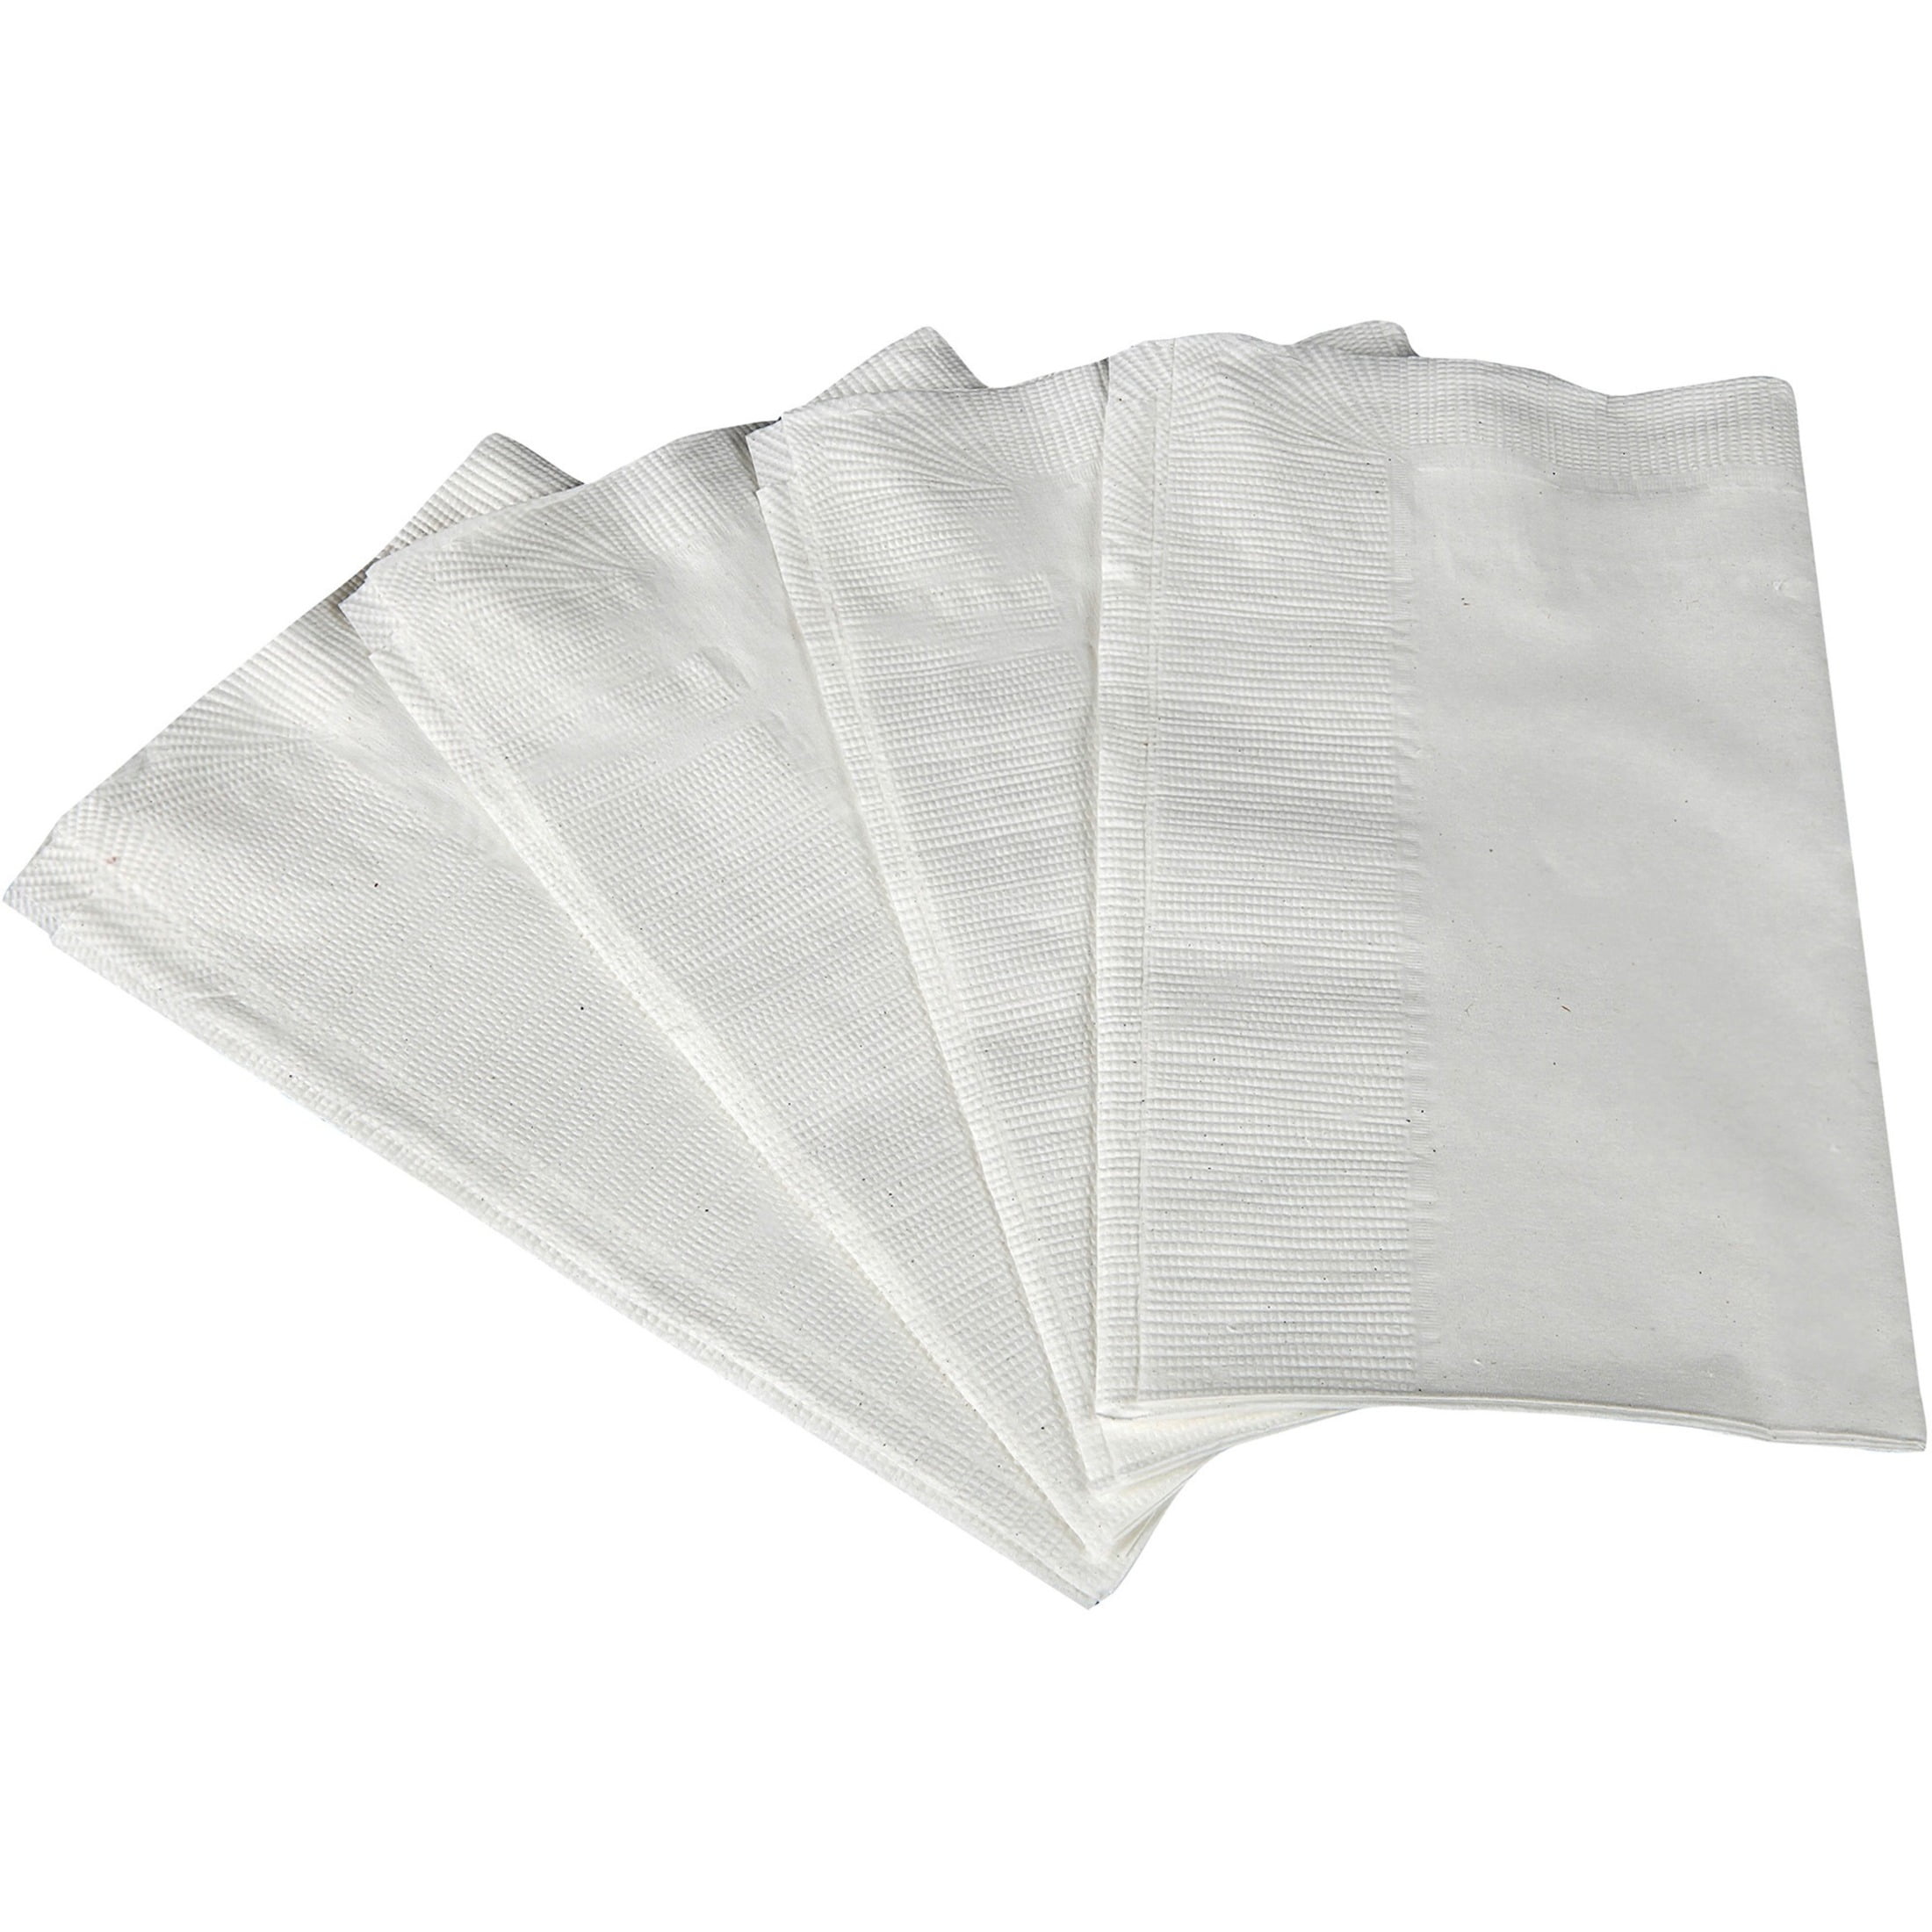 pARTY Black White Flora Squiggles Set of 16 Guest Towels Buffet 2-ply Napkins 